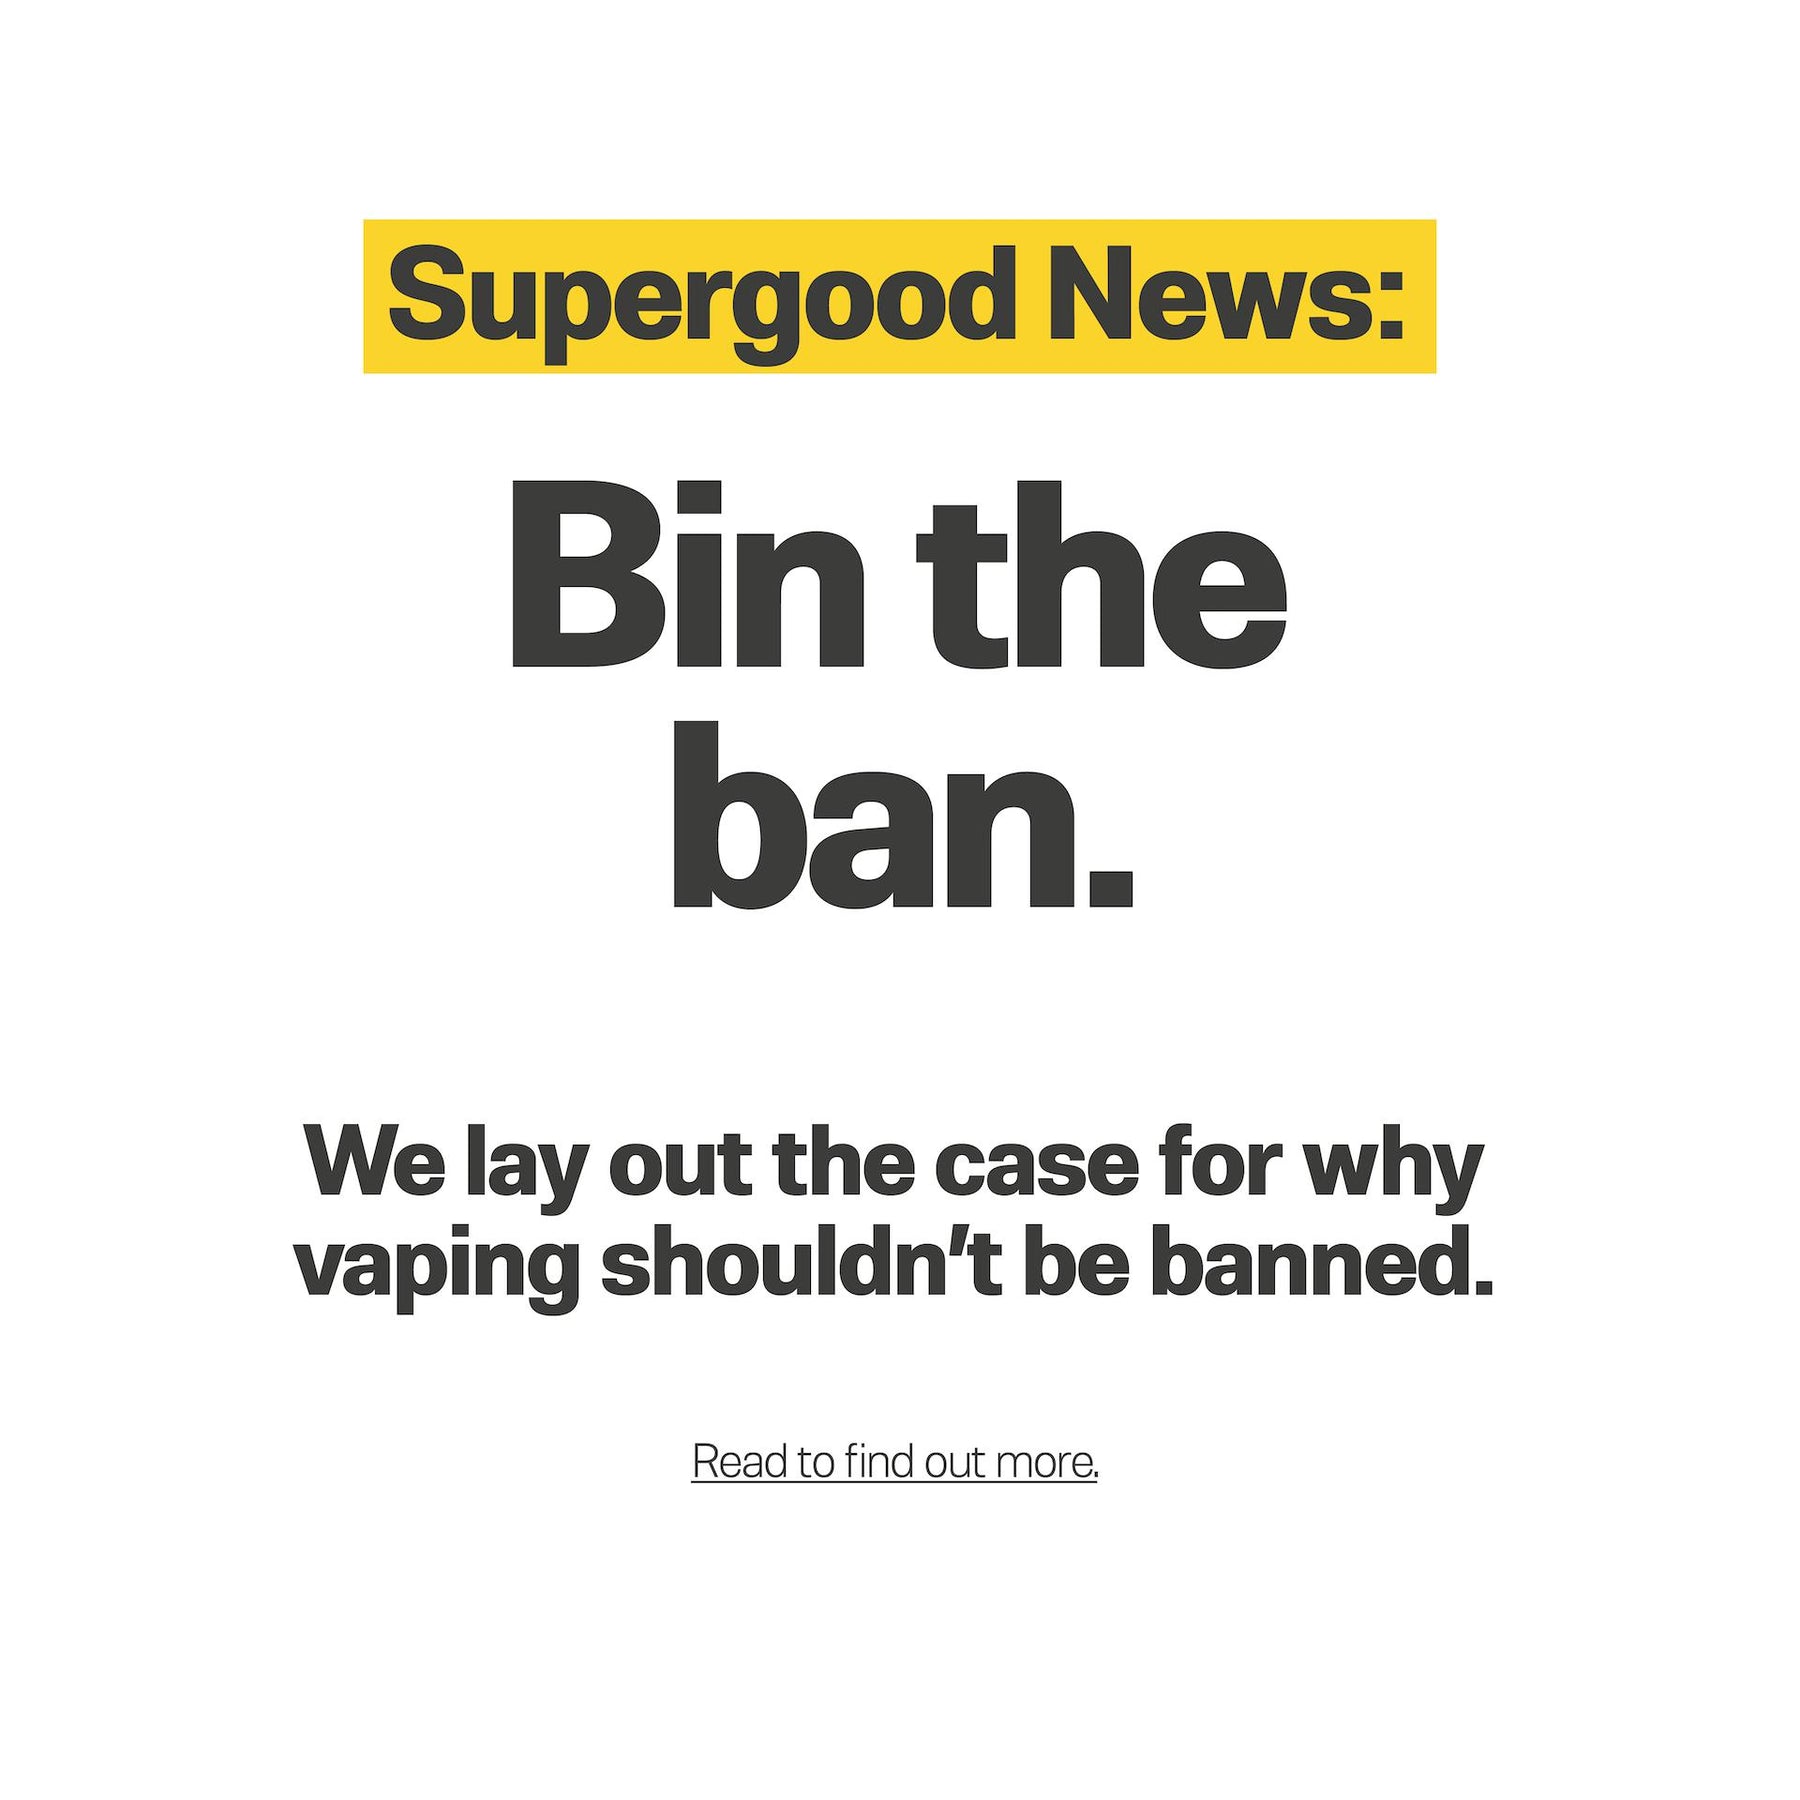 Vaping shouldn’t be banned.